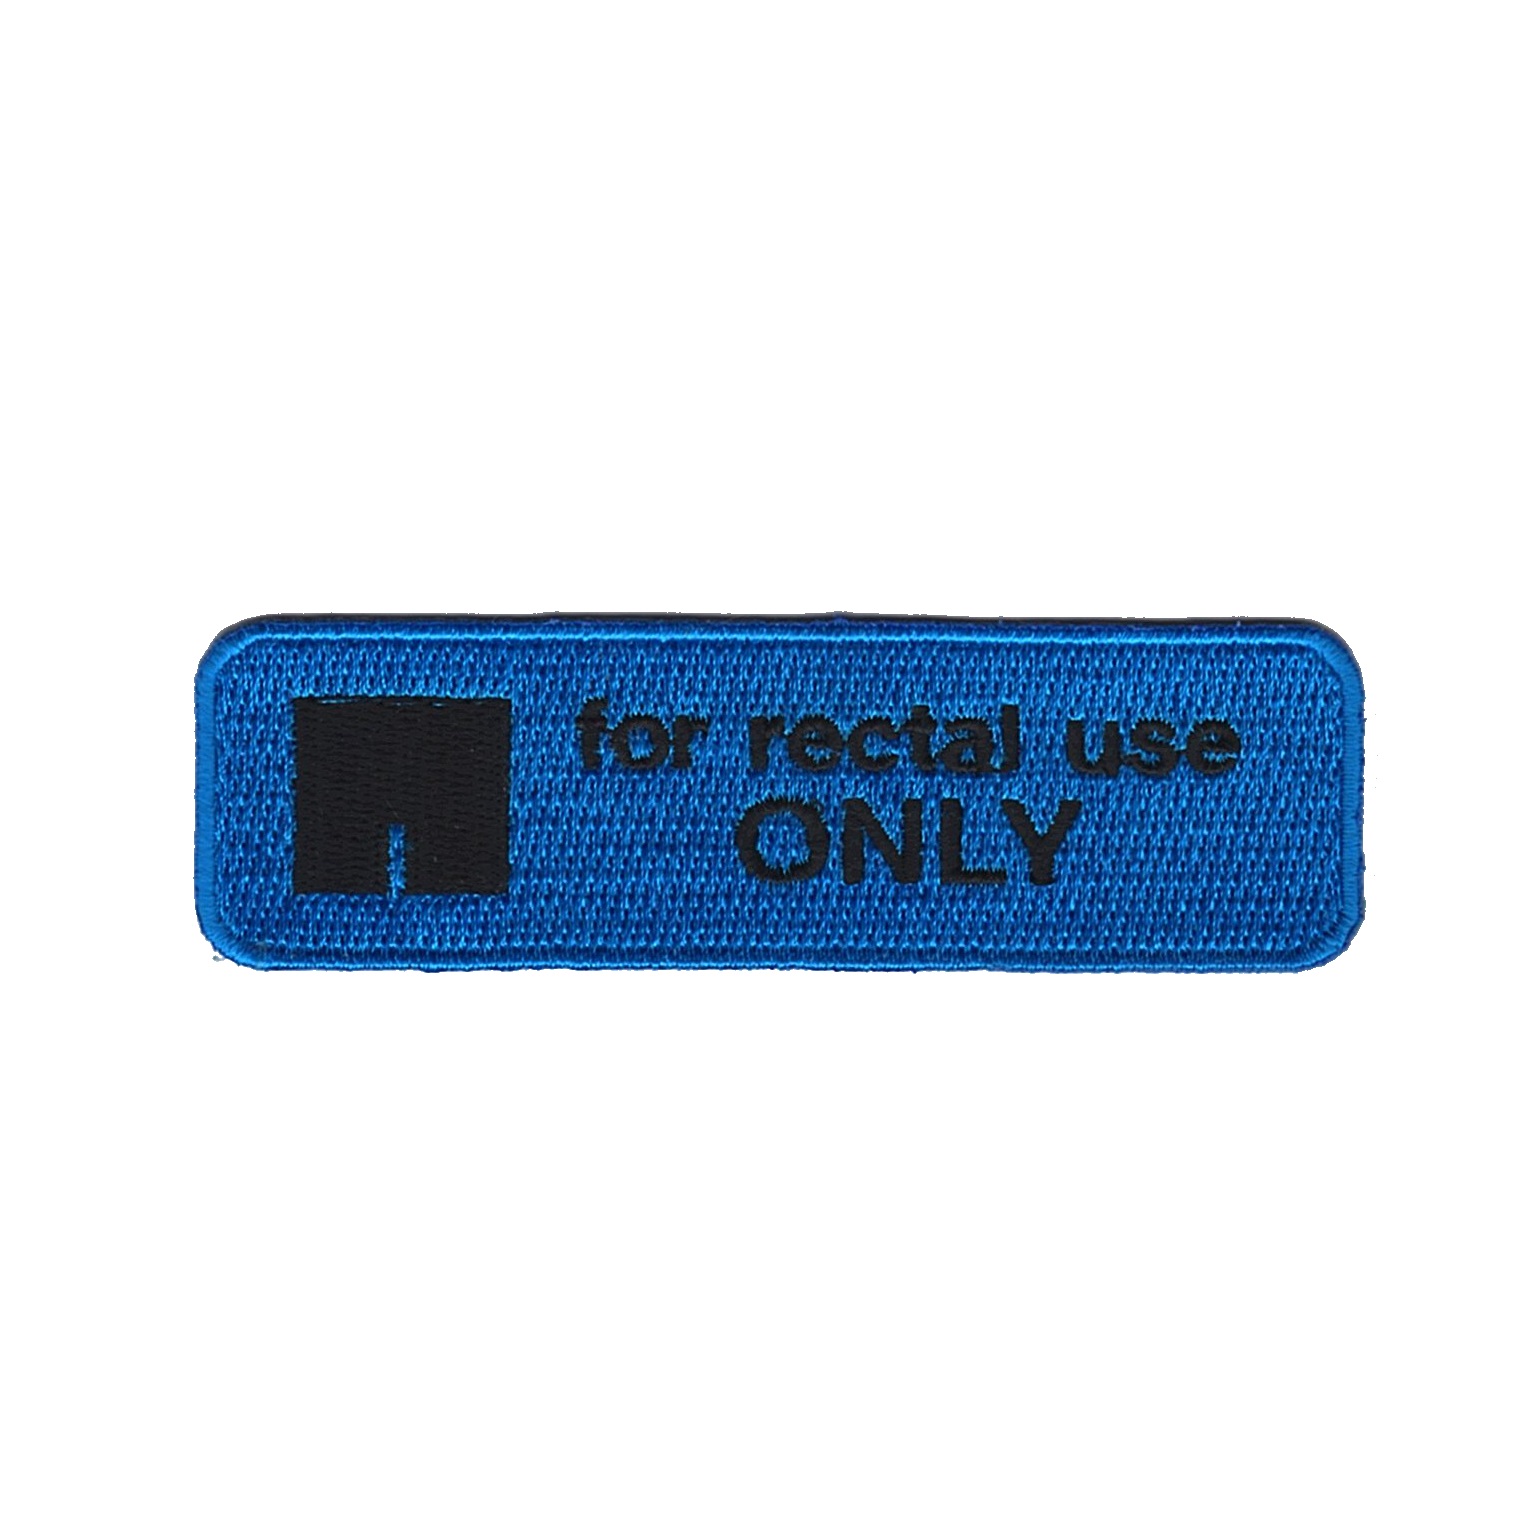 For rectal use only